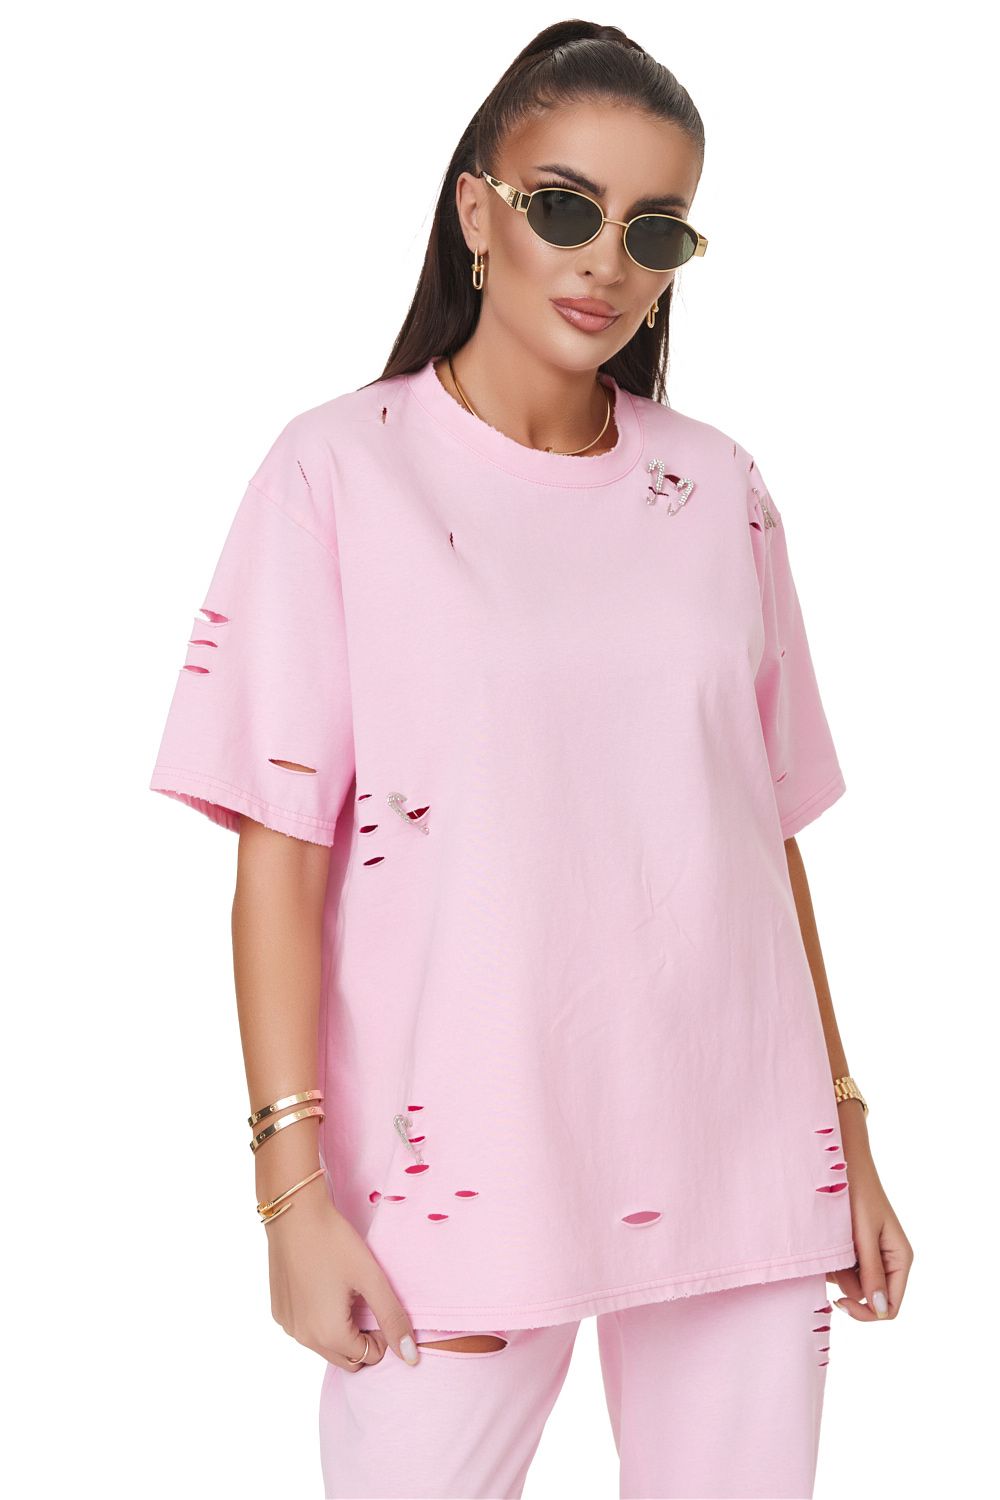 Lady's casual pink t-shirt Voliza Bogas